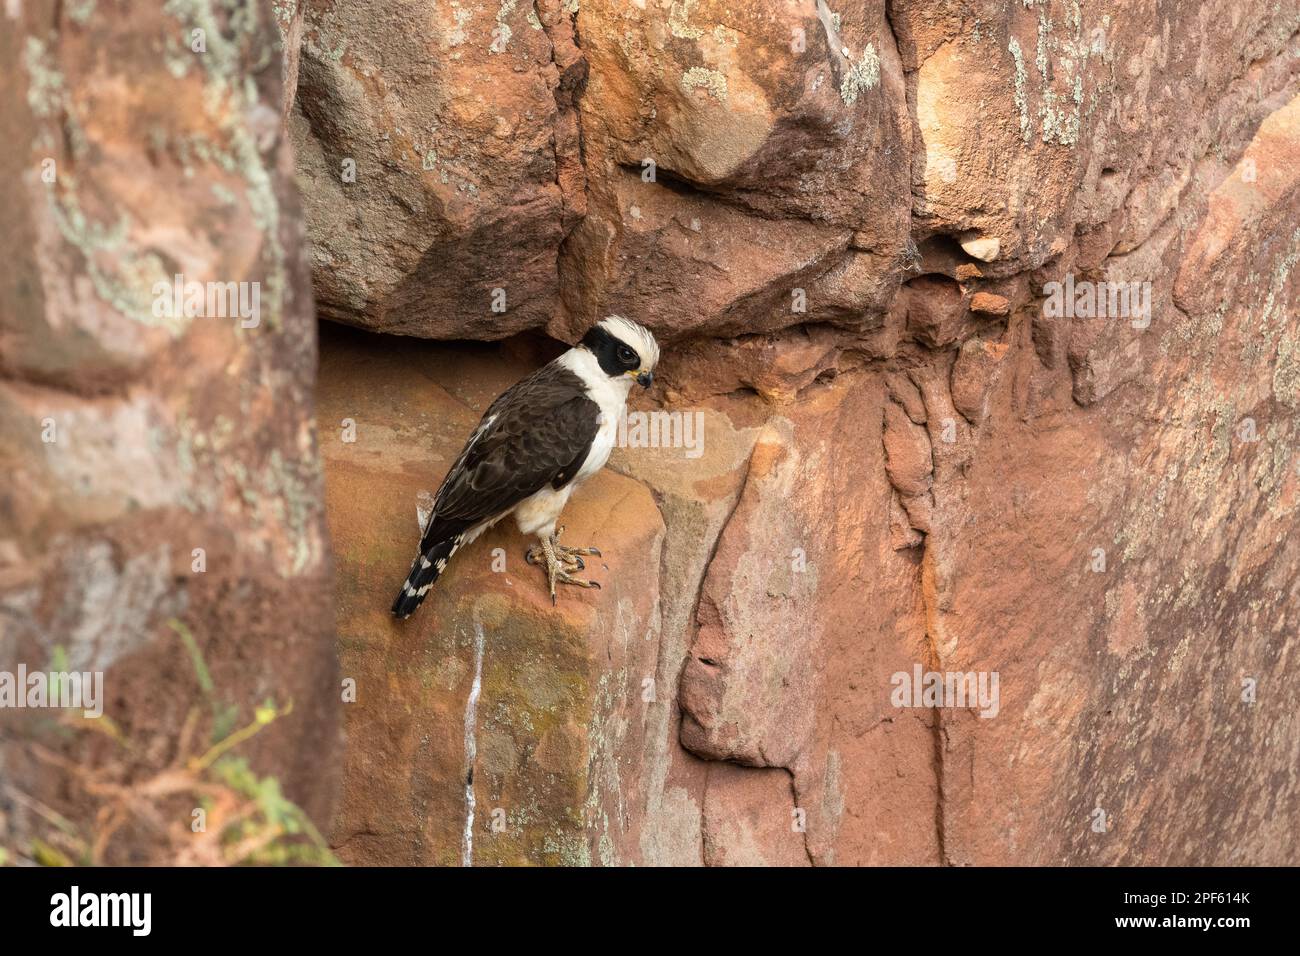 A Laughing Falcon (Herpetotheres cachinnans) at the entrance of its nesting site, inside a crevice on a vertical sandstone wall in Central Brazil Stock Photo